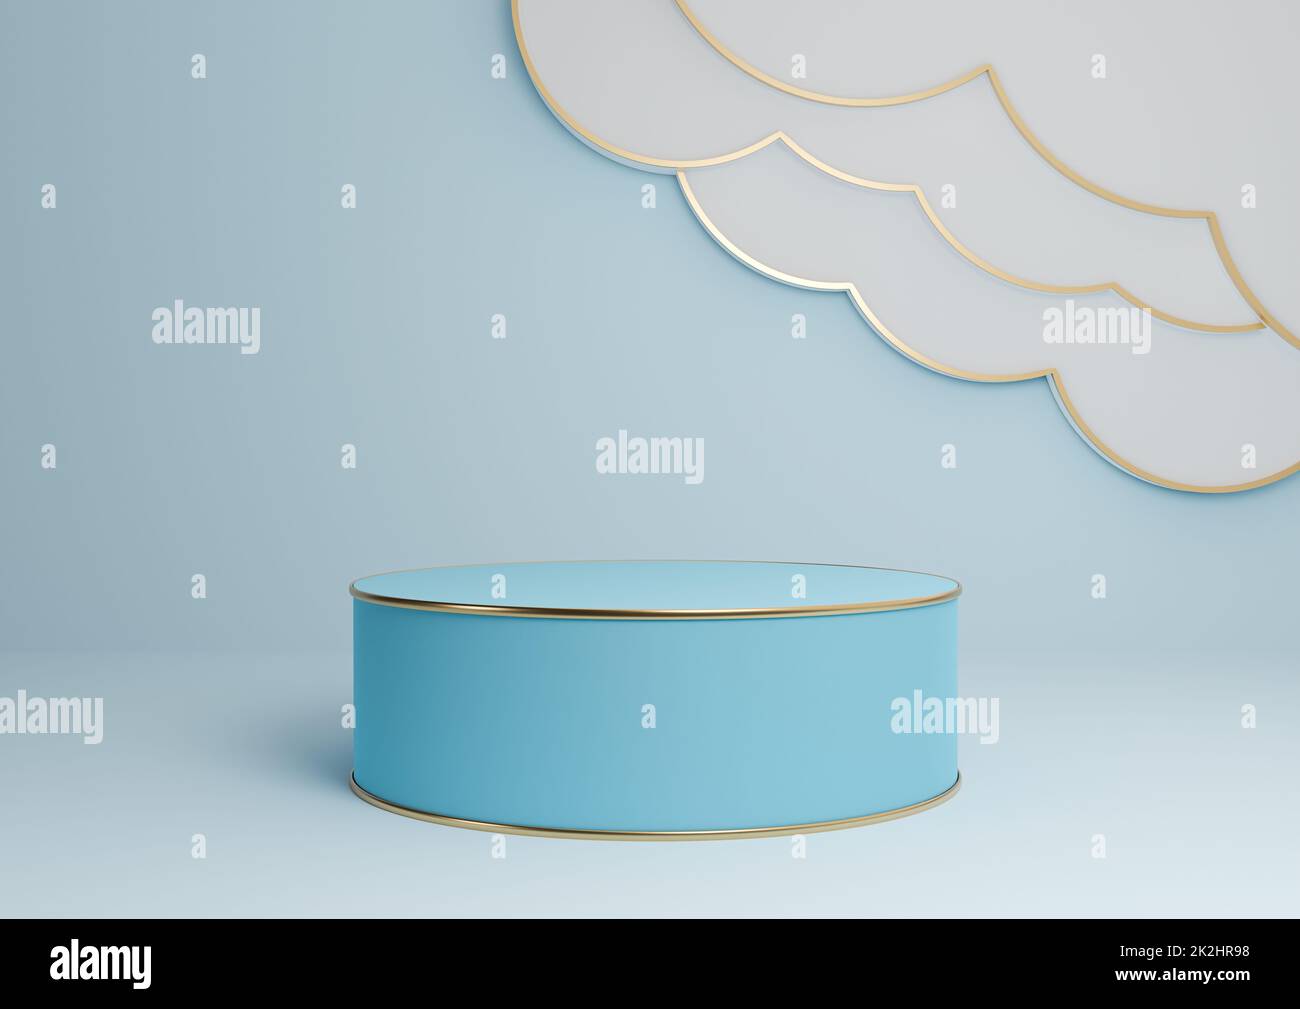 Light, pastel, baby blue 3D rendering product display podium or stand with abstract clouds and golden lines luxurious minimal, simple composition background cylinder platform Stock Photo